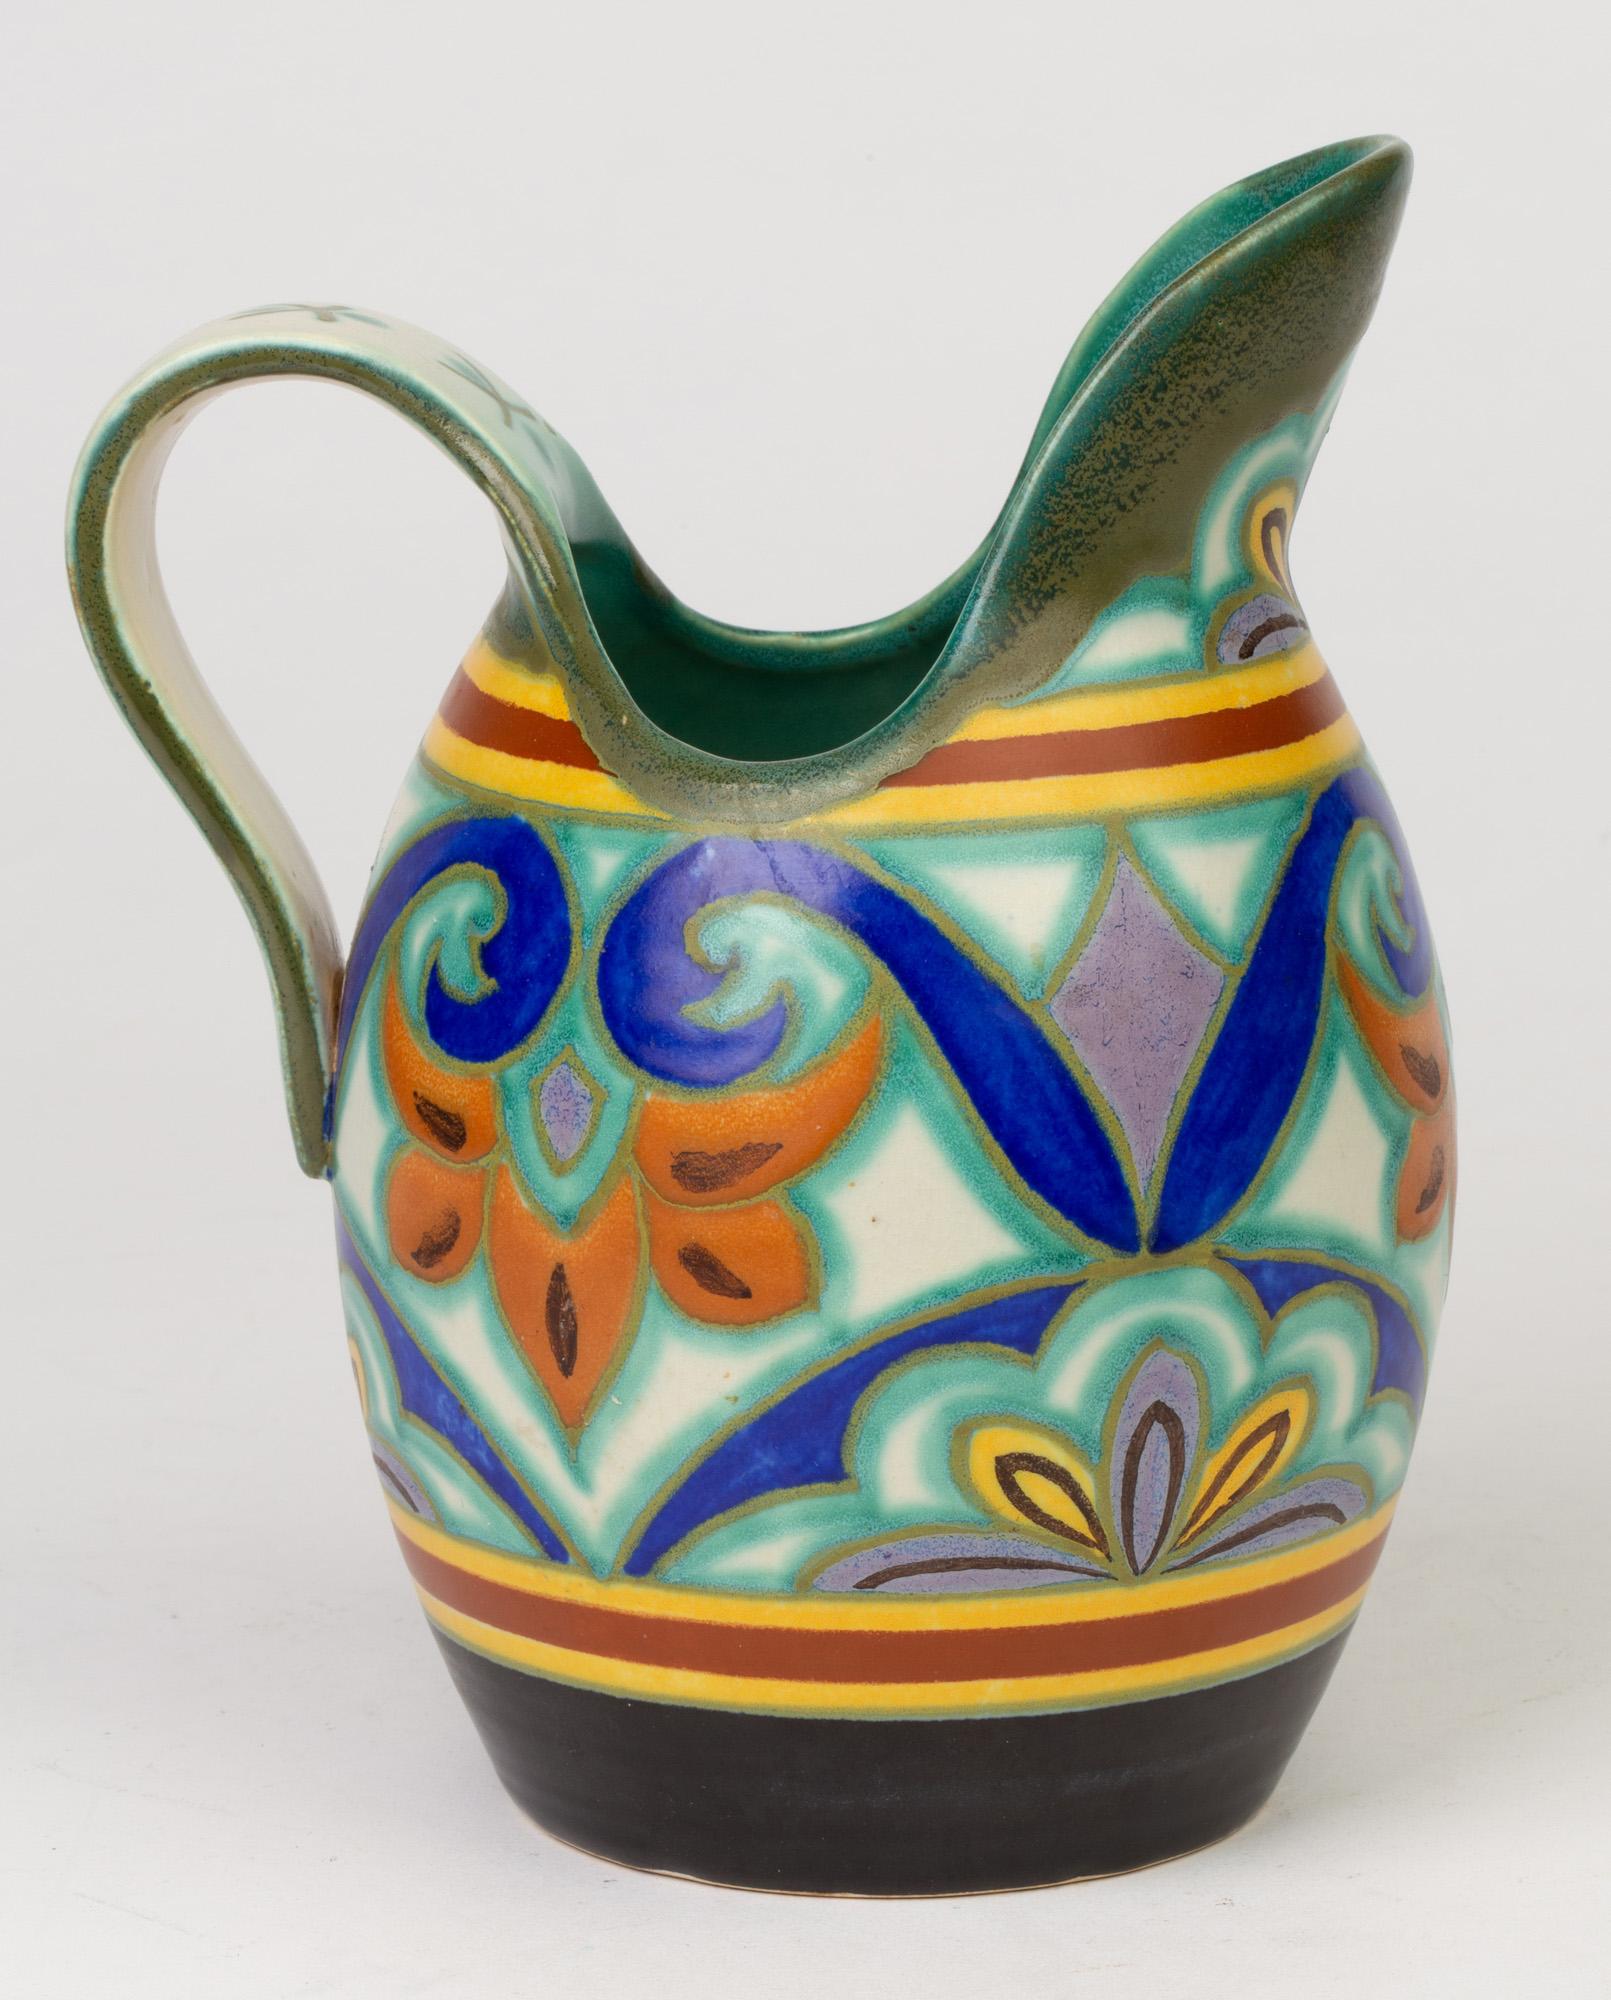 A stunning Dutch Gouda, Plateelbakkerij Zuid-Holland Art Deco pottery jug hand painted in the Neloca design and dating between 1920 and 1929. The rounded bulbous shaped jug has a large raised lip shaped pouring spout and a looped strap handle and is